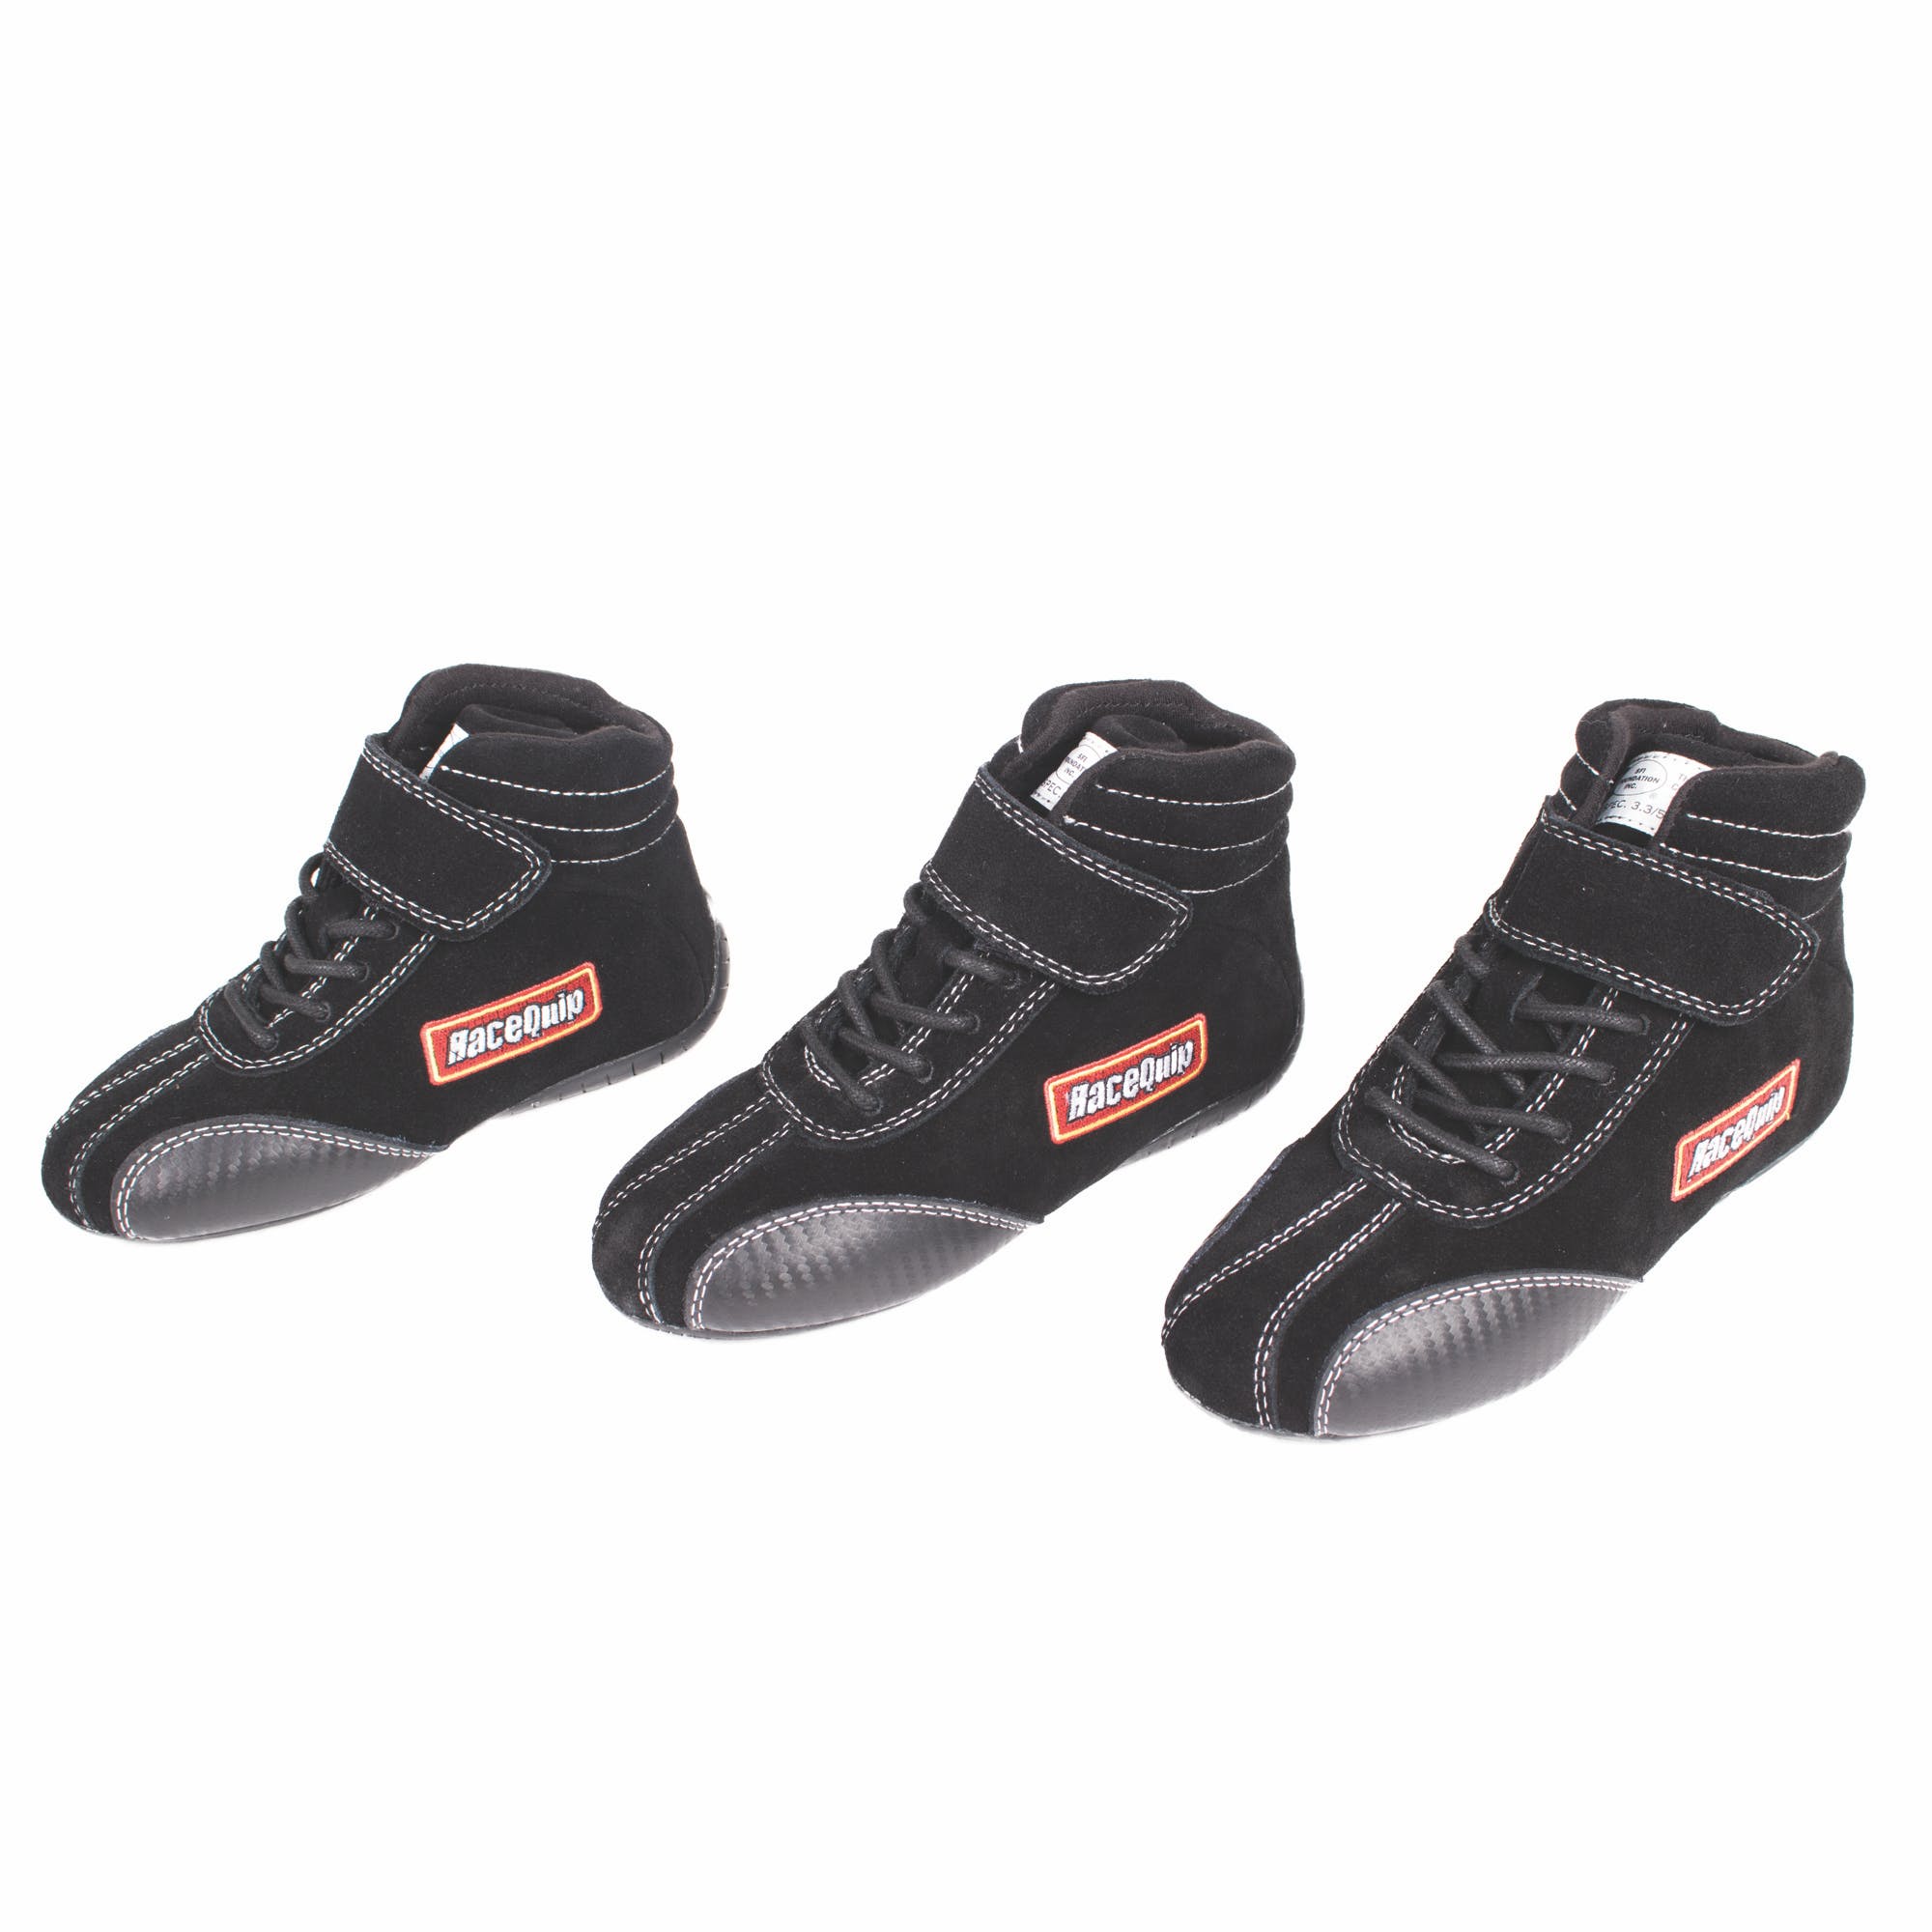 RaceQuip 30400906 Euro Carbon-L Series Race Shoes SFI 3.3/ 5 Certified; Black Youth Size 6